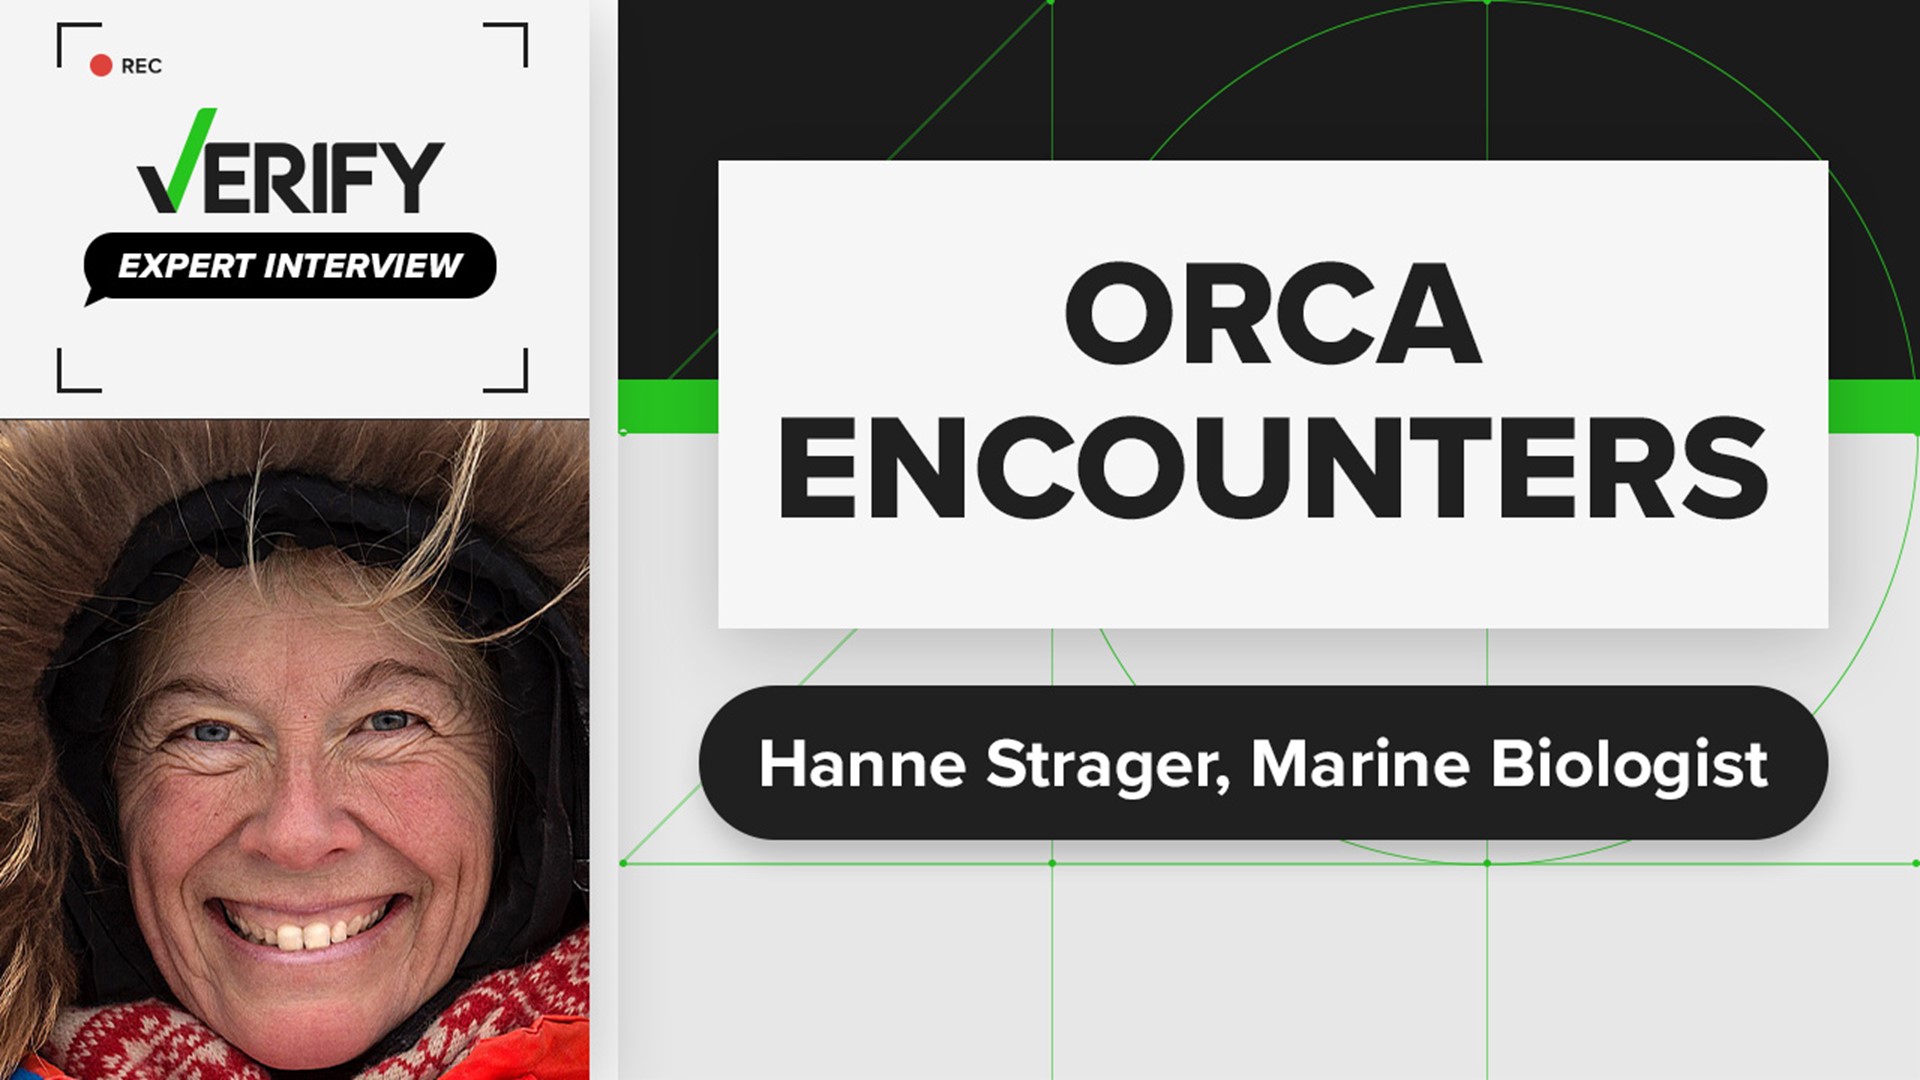 More than 500 encounters between orcas and boats have been reported since 2020. Marine biologist Hanne Strager shares why she thinks they are becoming more frequent